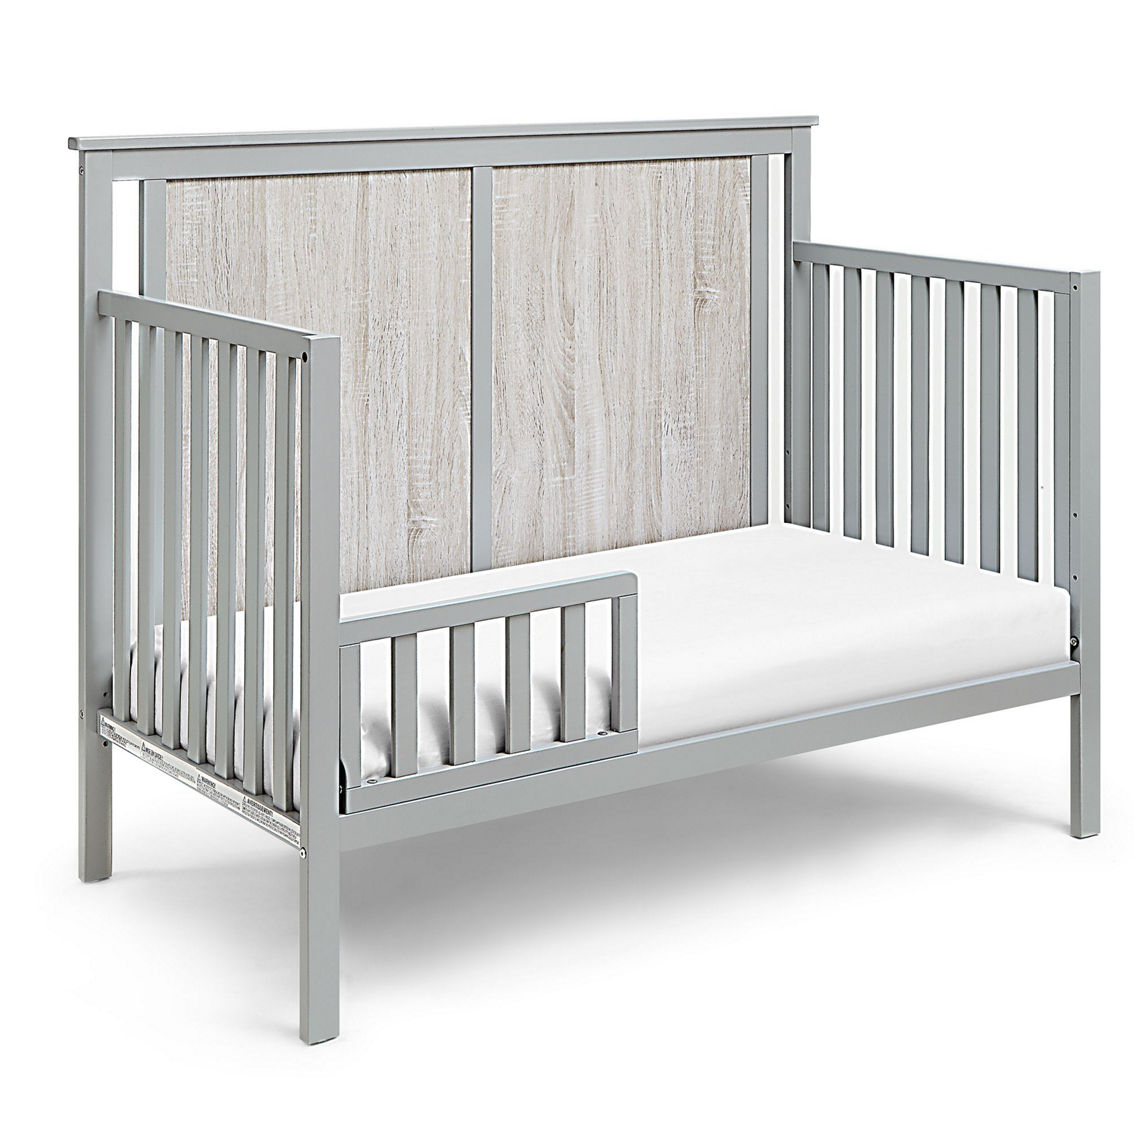 Suite Bebe Connelly 4-in-1 Convertible Crib Gray/Rockport Gray - Image 3 of 5